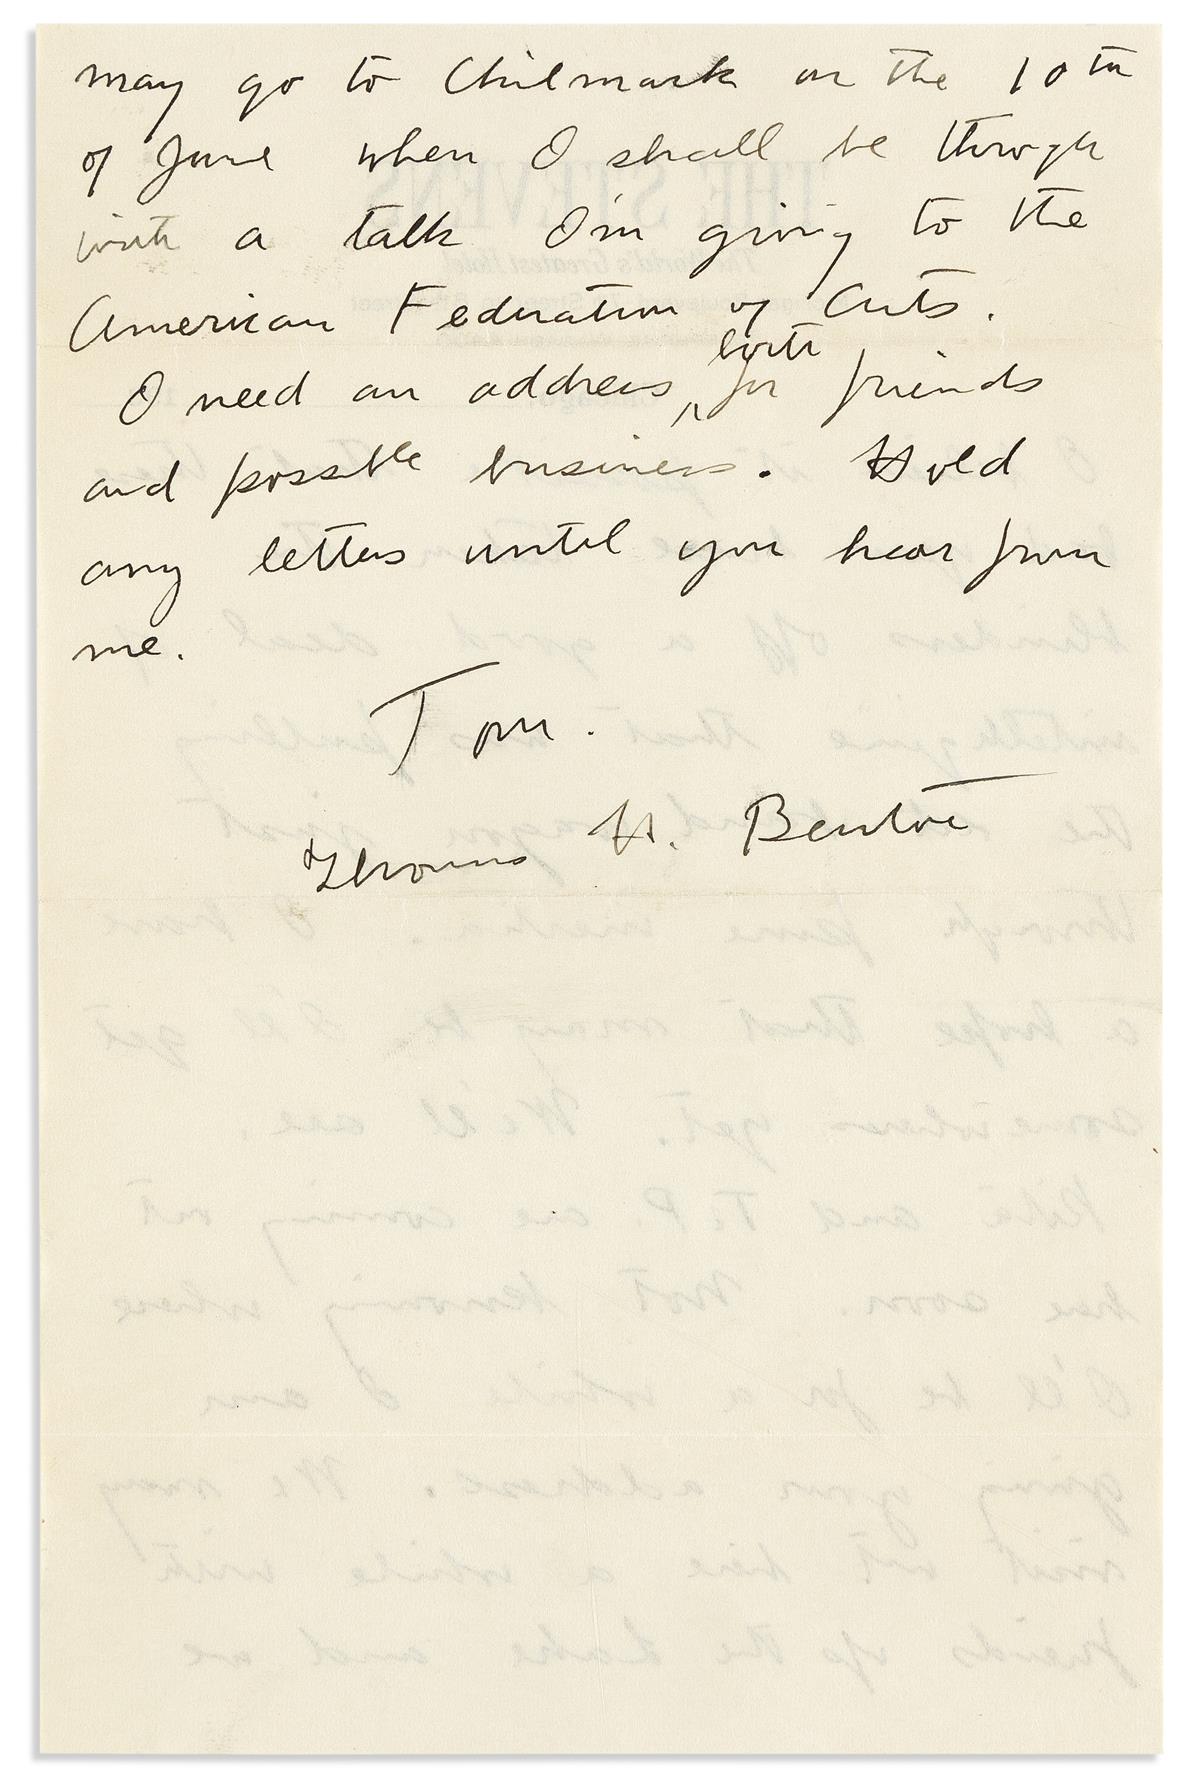 BENTON, THOMAS HART. Group of 17 items Signed, or Inscribed and Signed, Thomas H. Benton or Tom or T, to collector Hyman Cohen, i